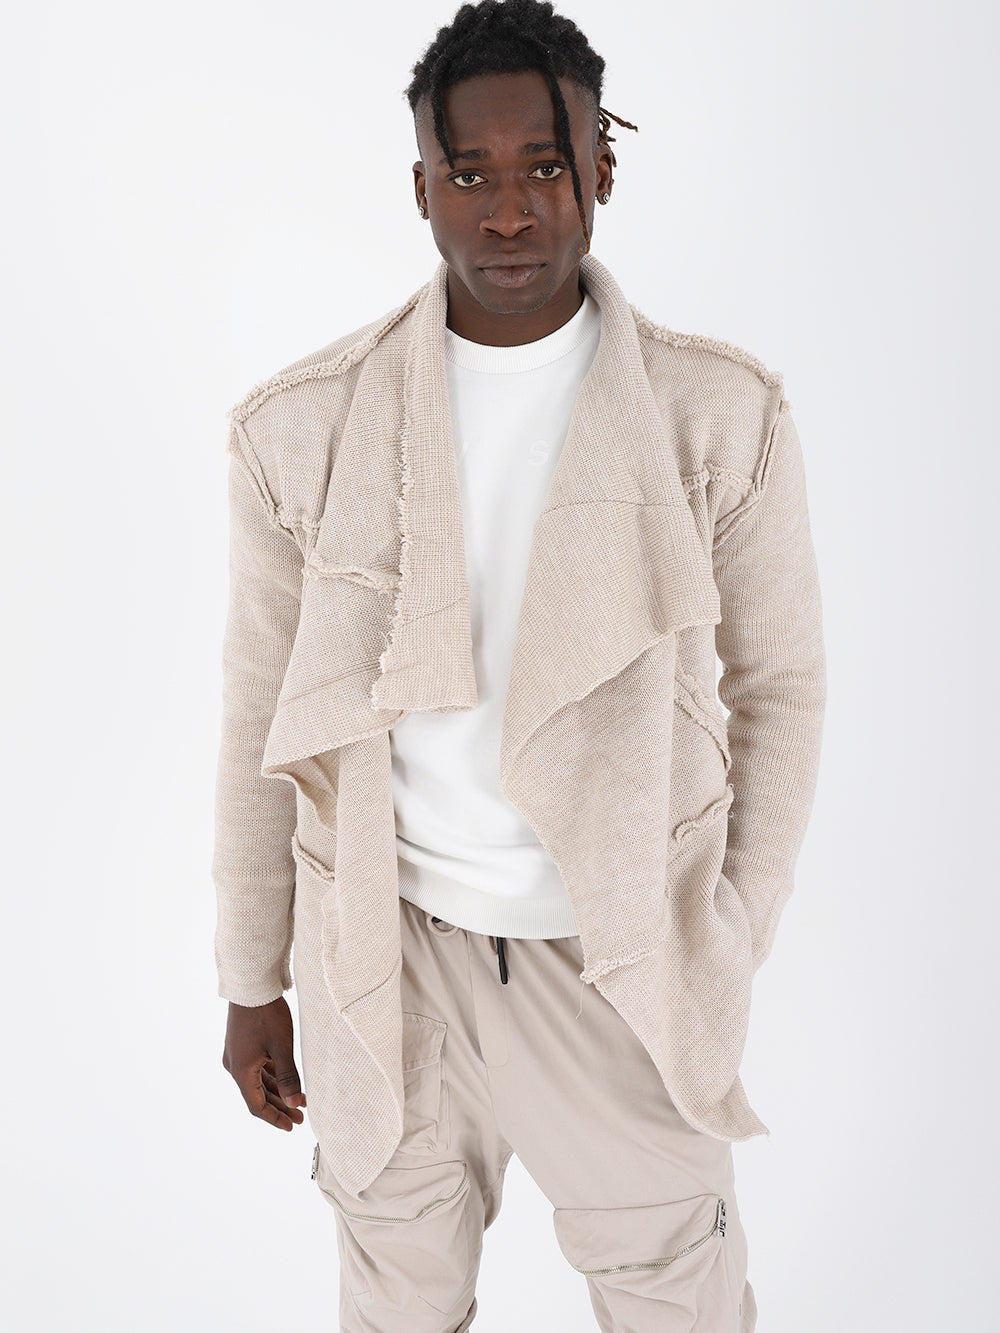 A black man wearing a beige jacket and white pants with the ASYMMETRIC SHORT CARDIGAN // IVORY.